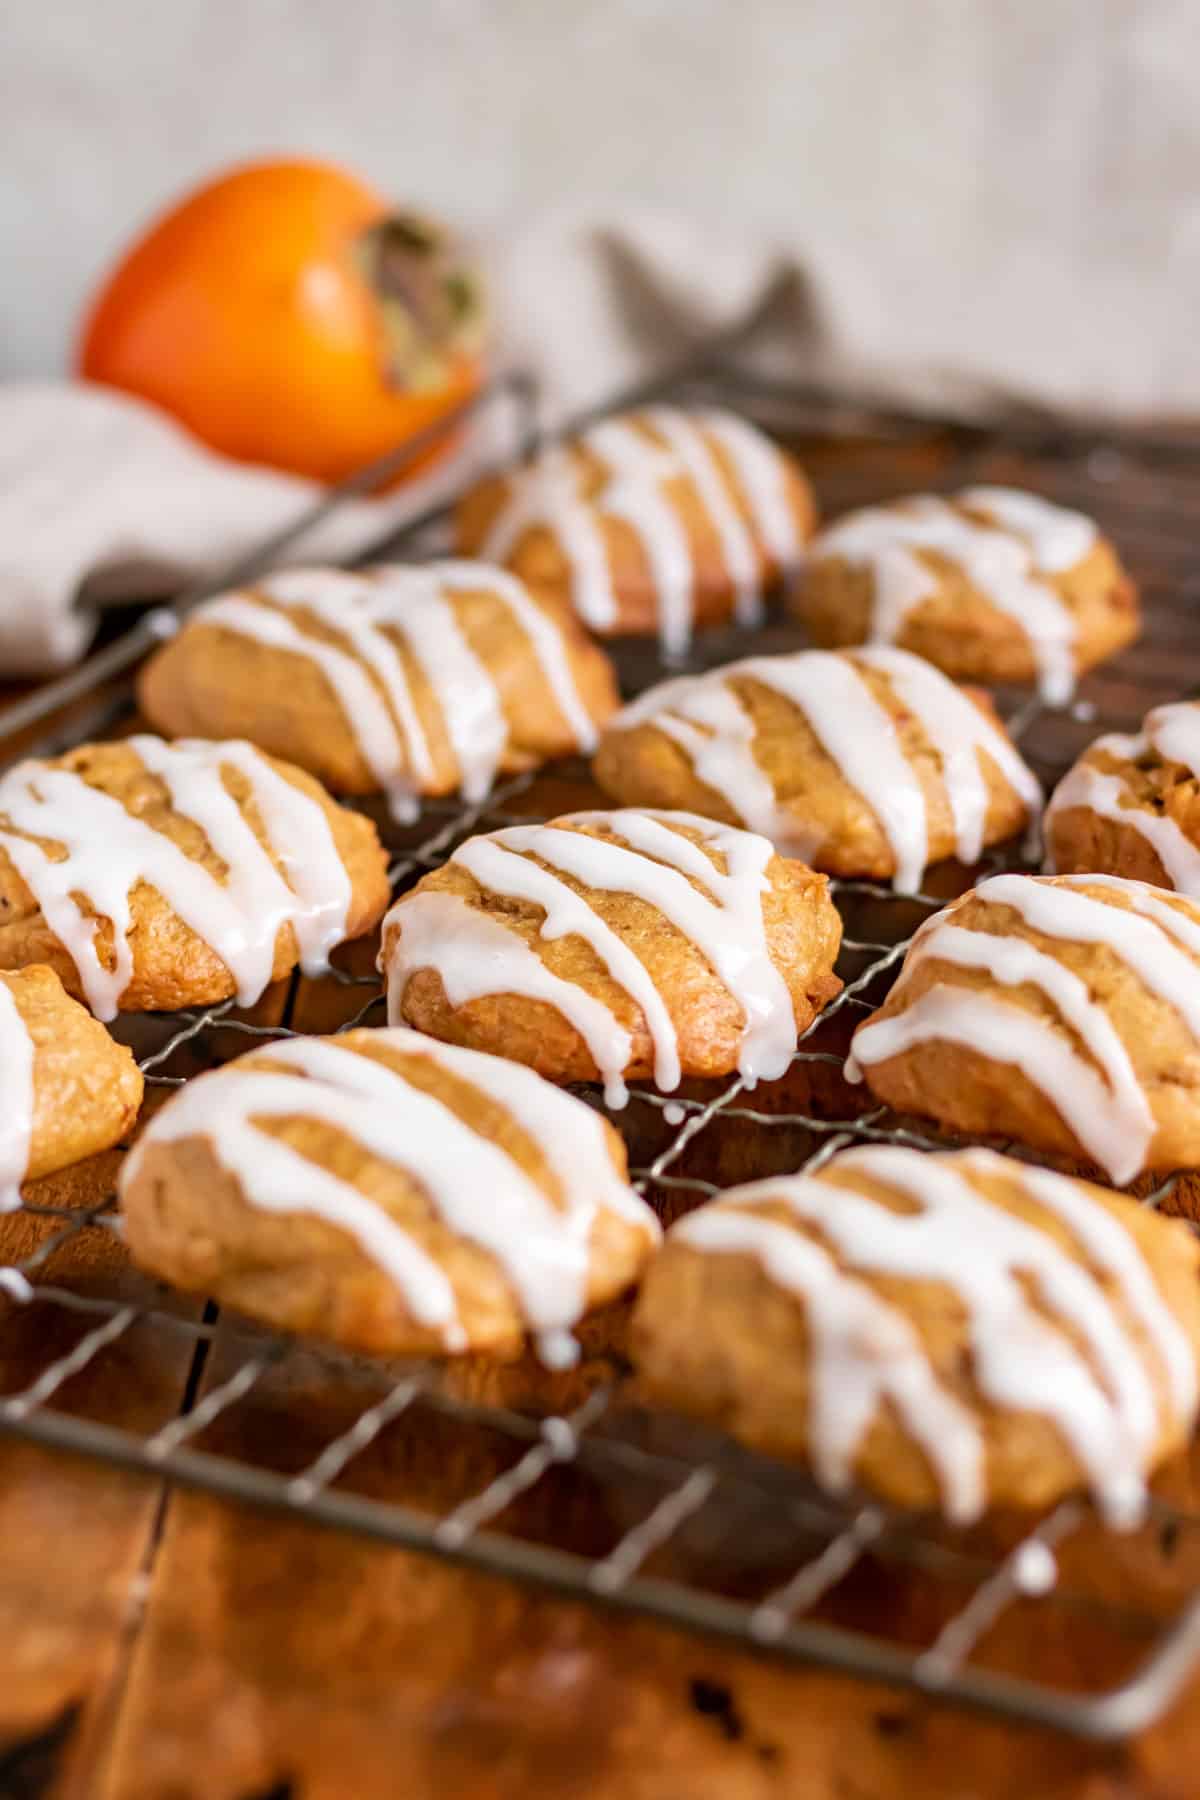 Rows of cookies with icing drizzled on them.